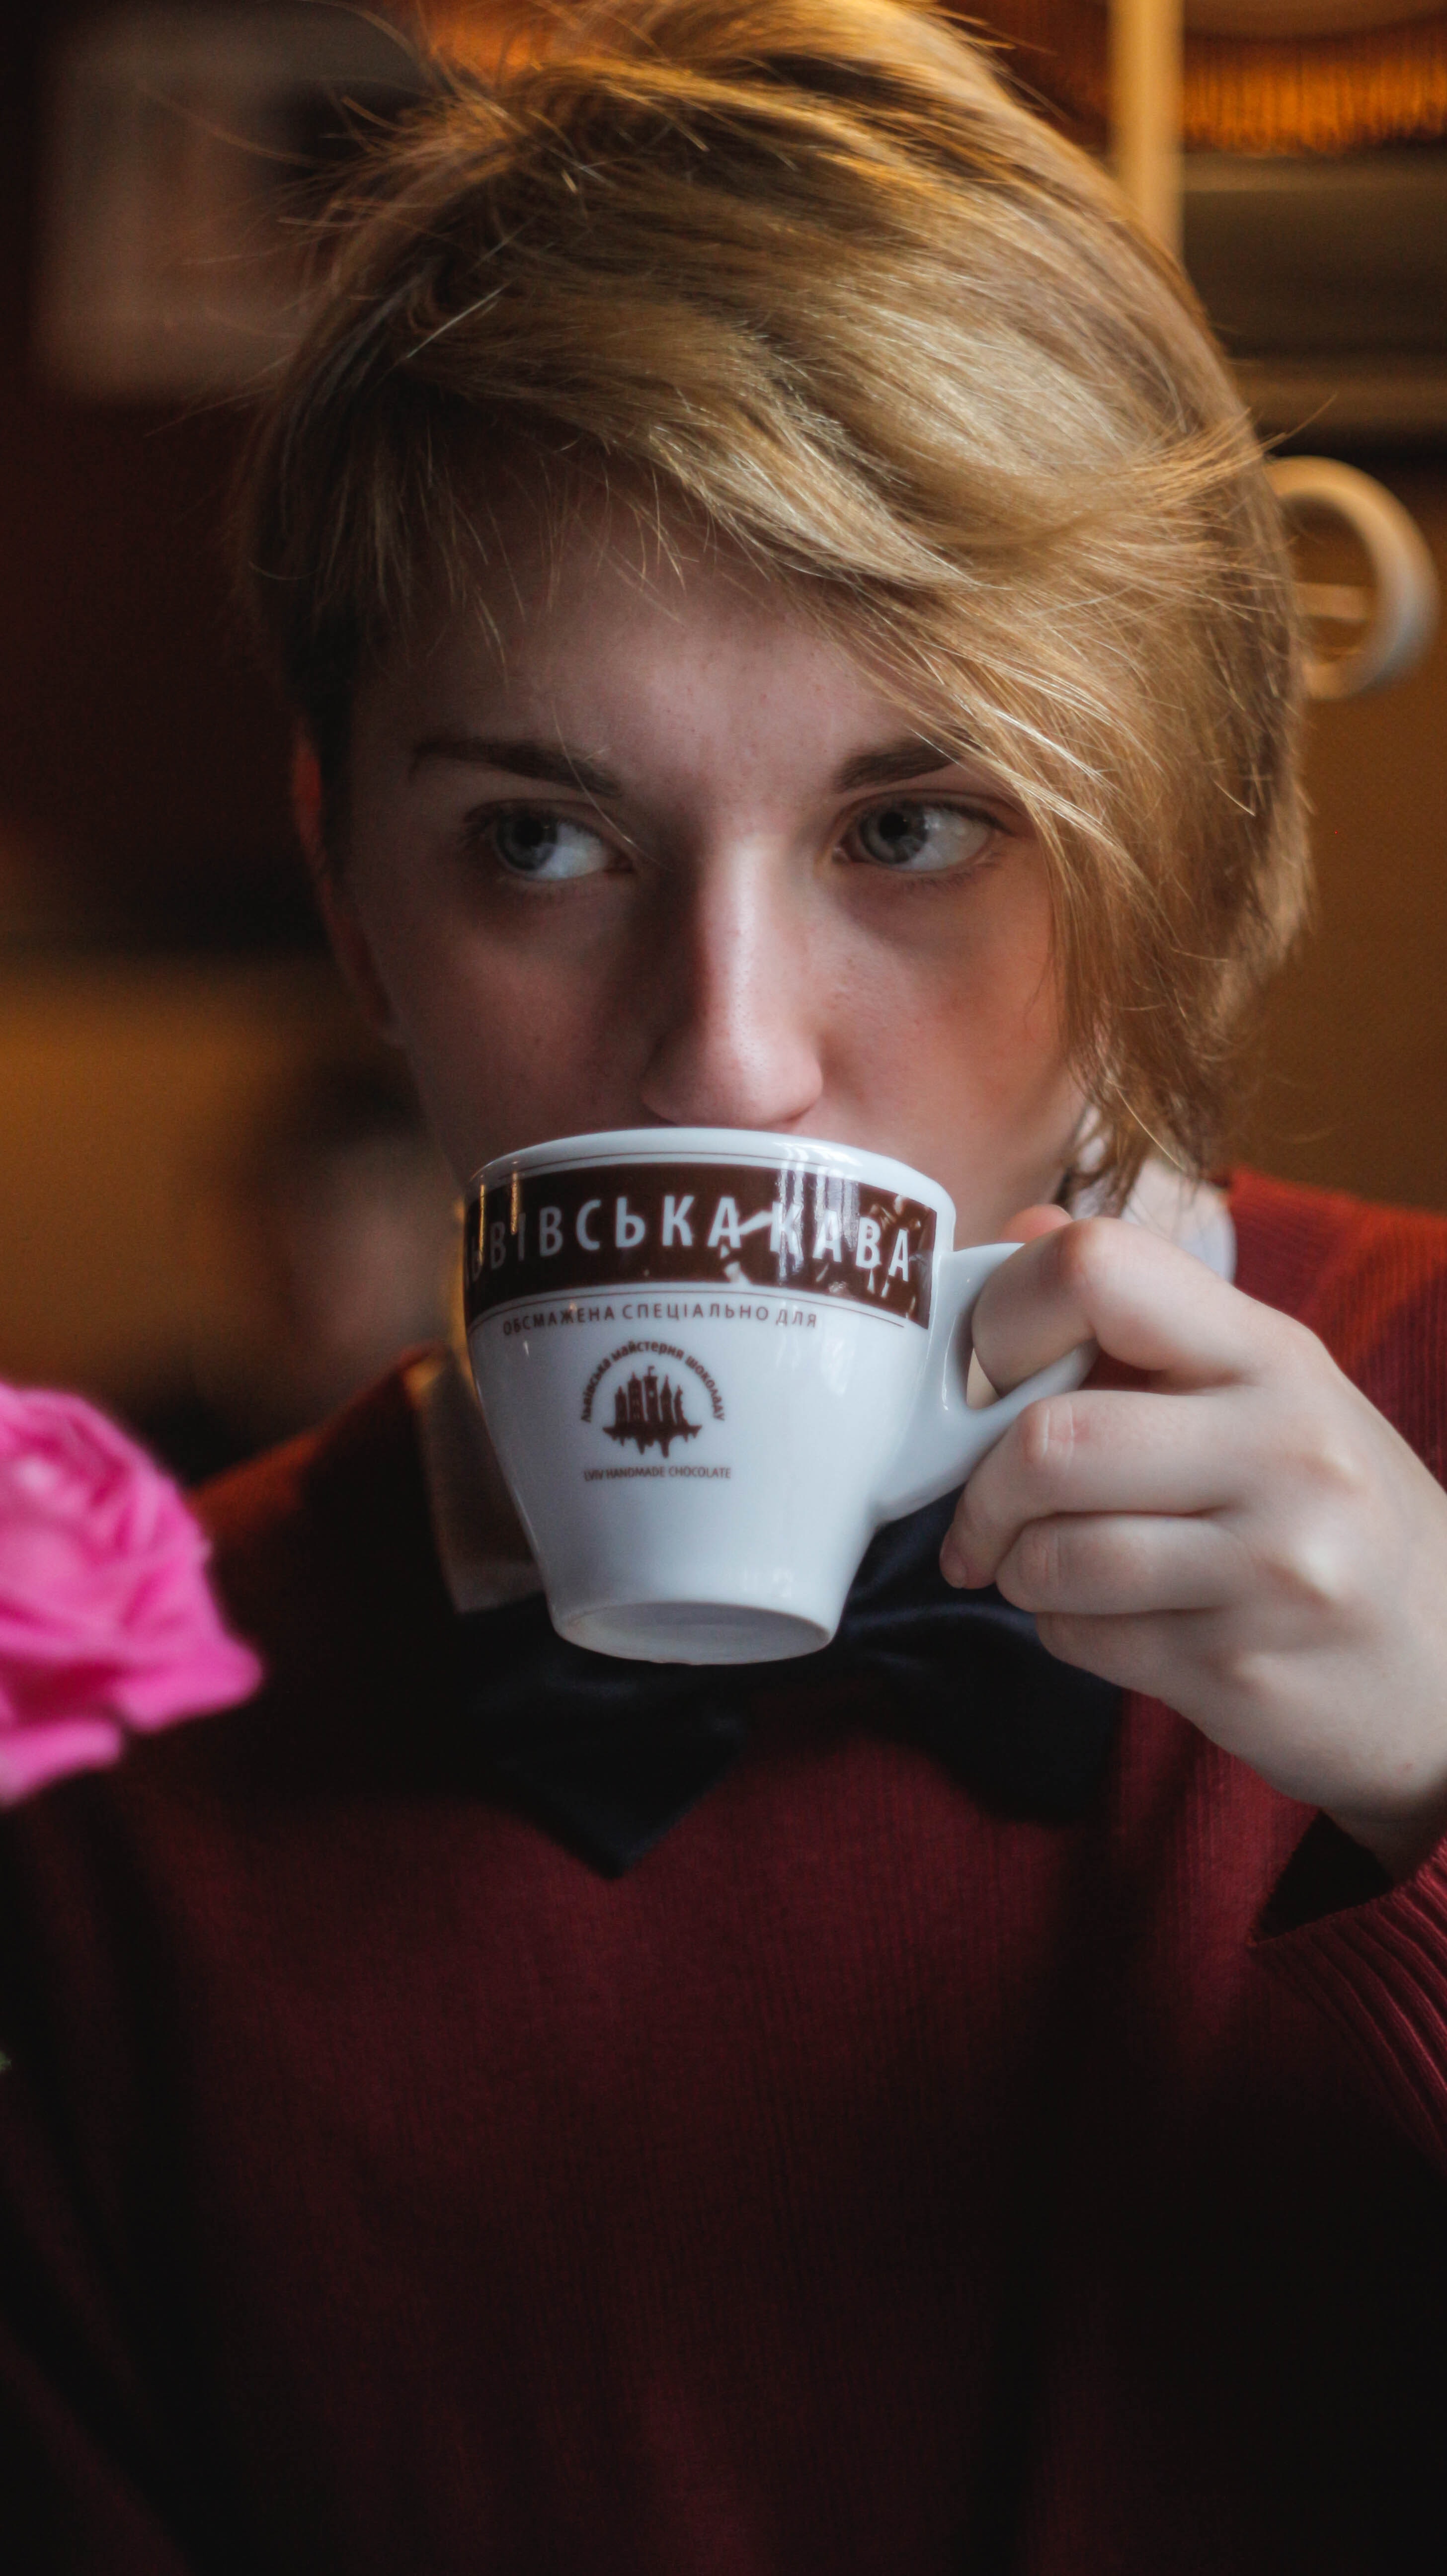 Woman wearing red top holding teacup photo